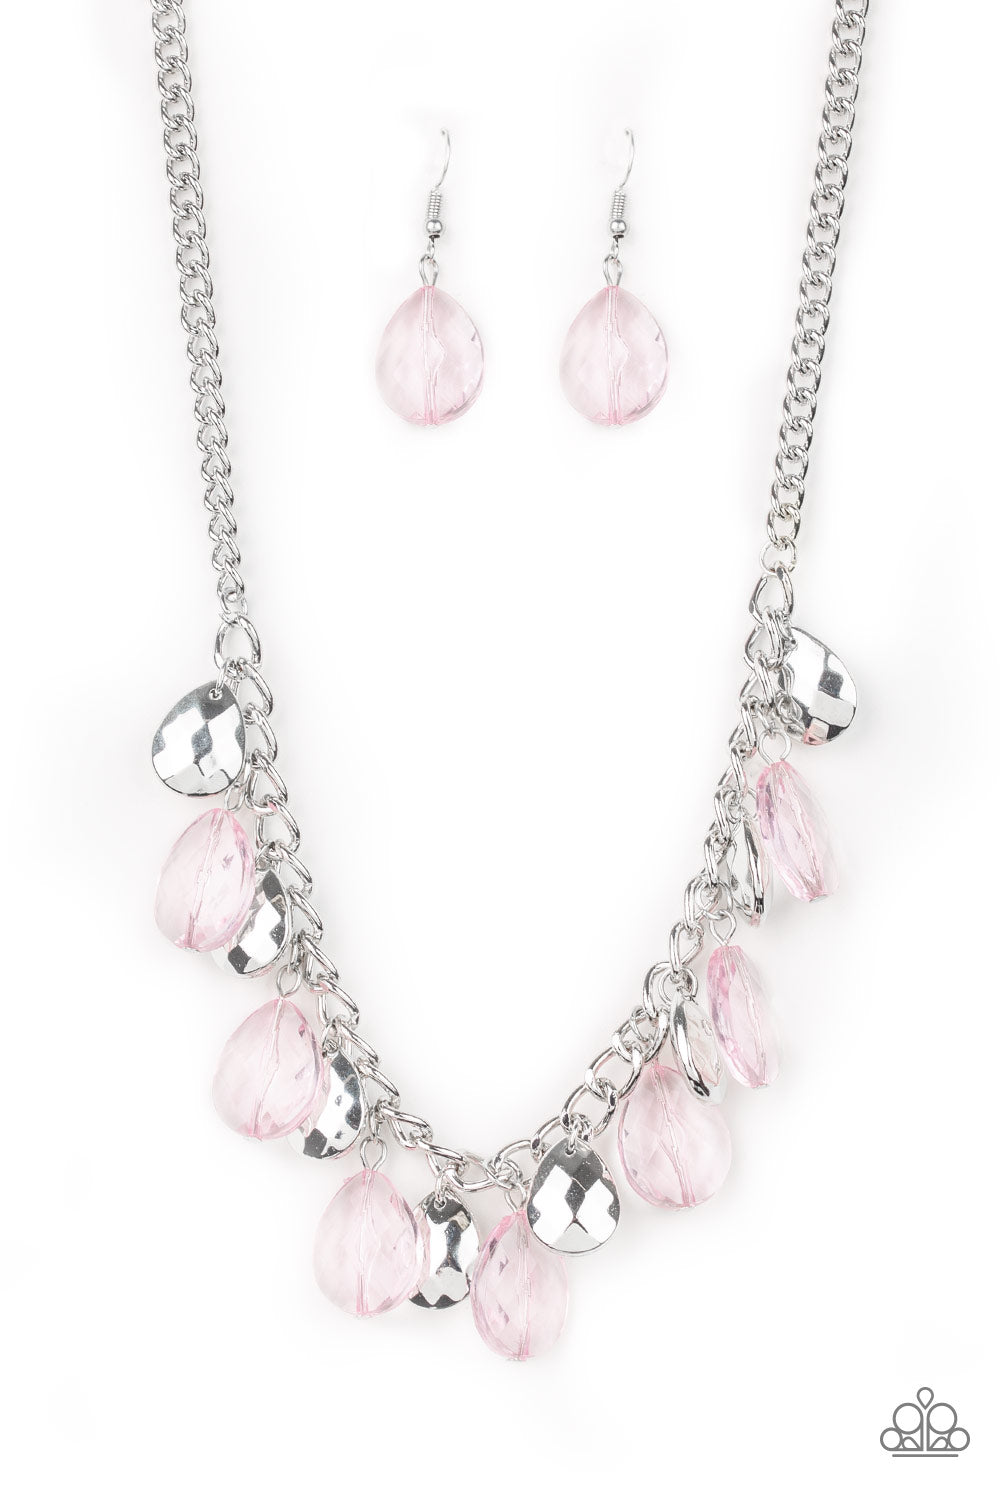 No Tears Left To Cry Pink Paparazzi Necklace Cashmere Pink Jewels - Cashmere Pink Jewels & Accessories, Cashmere Pink Jewels & Accessories - Paparazzi